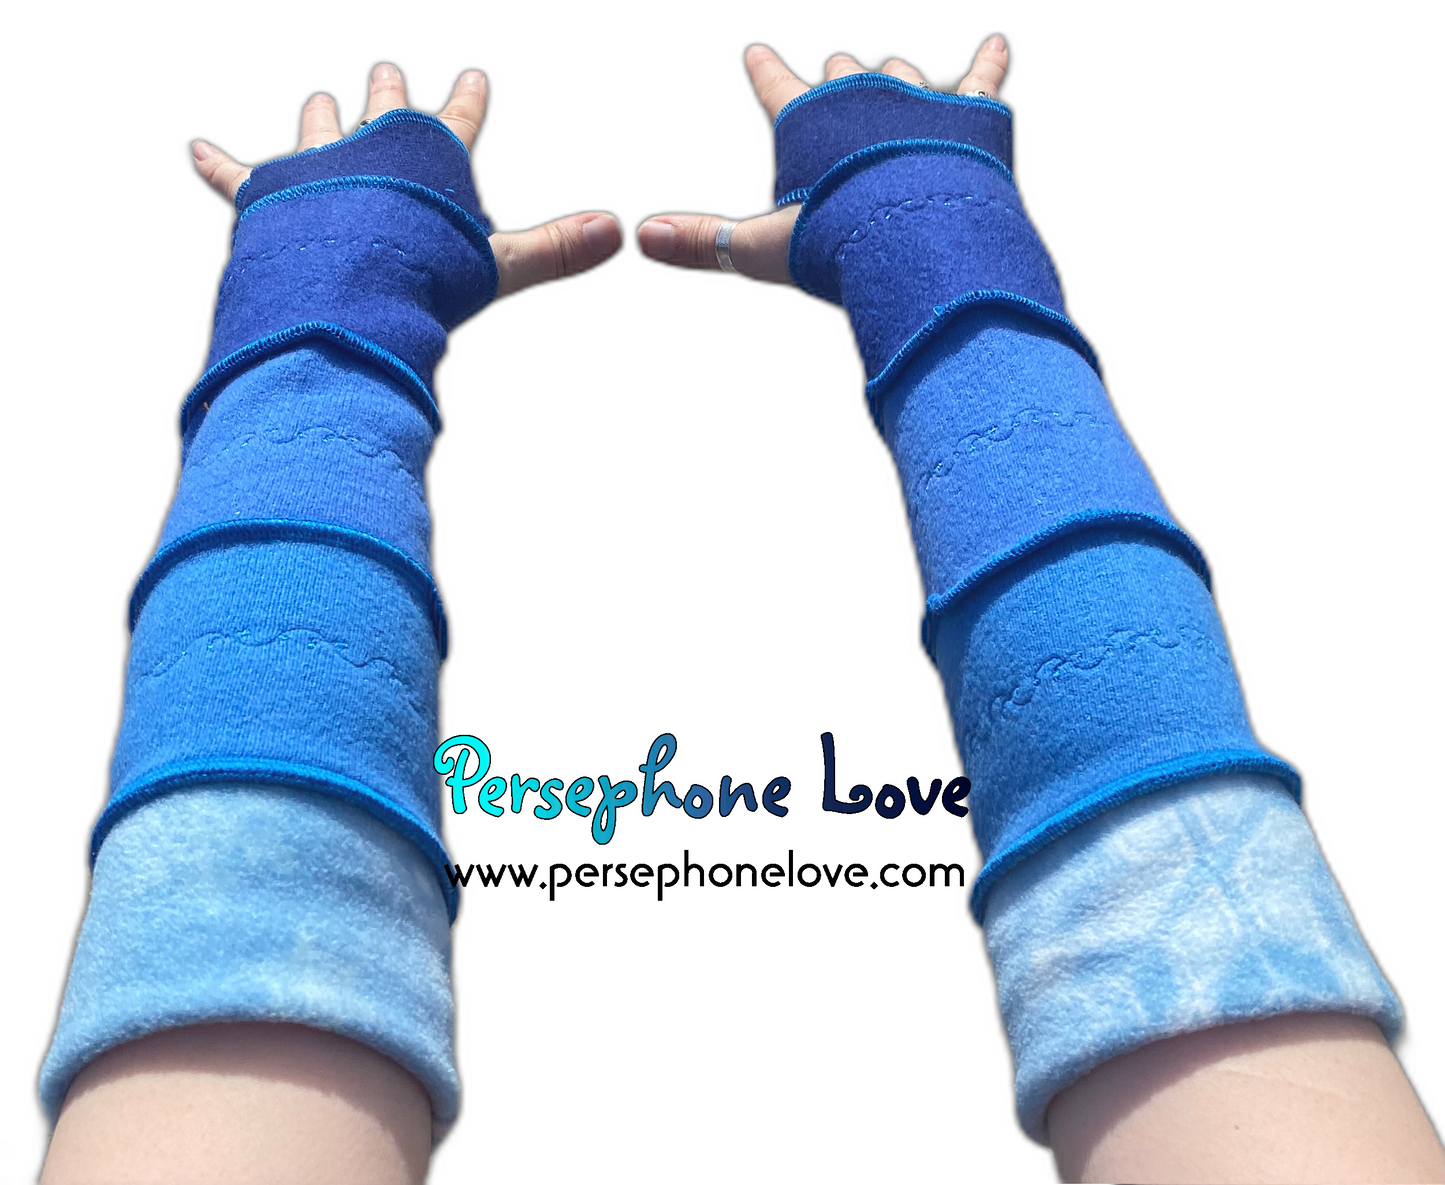 Katwise inspired needle-felted blue 100% cashmere upcycled sweater arm warmers -1499